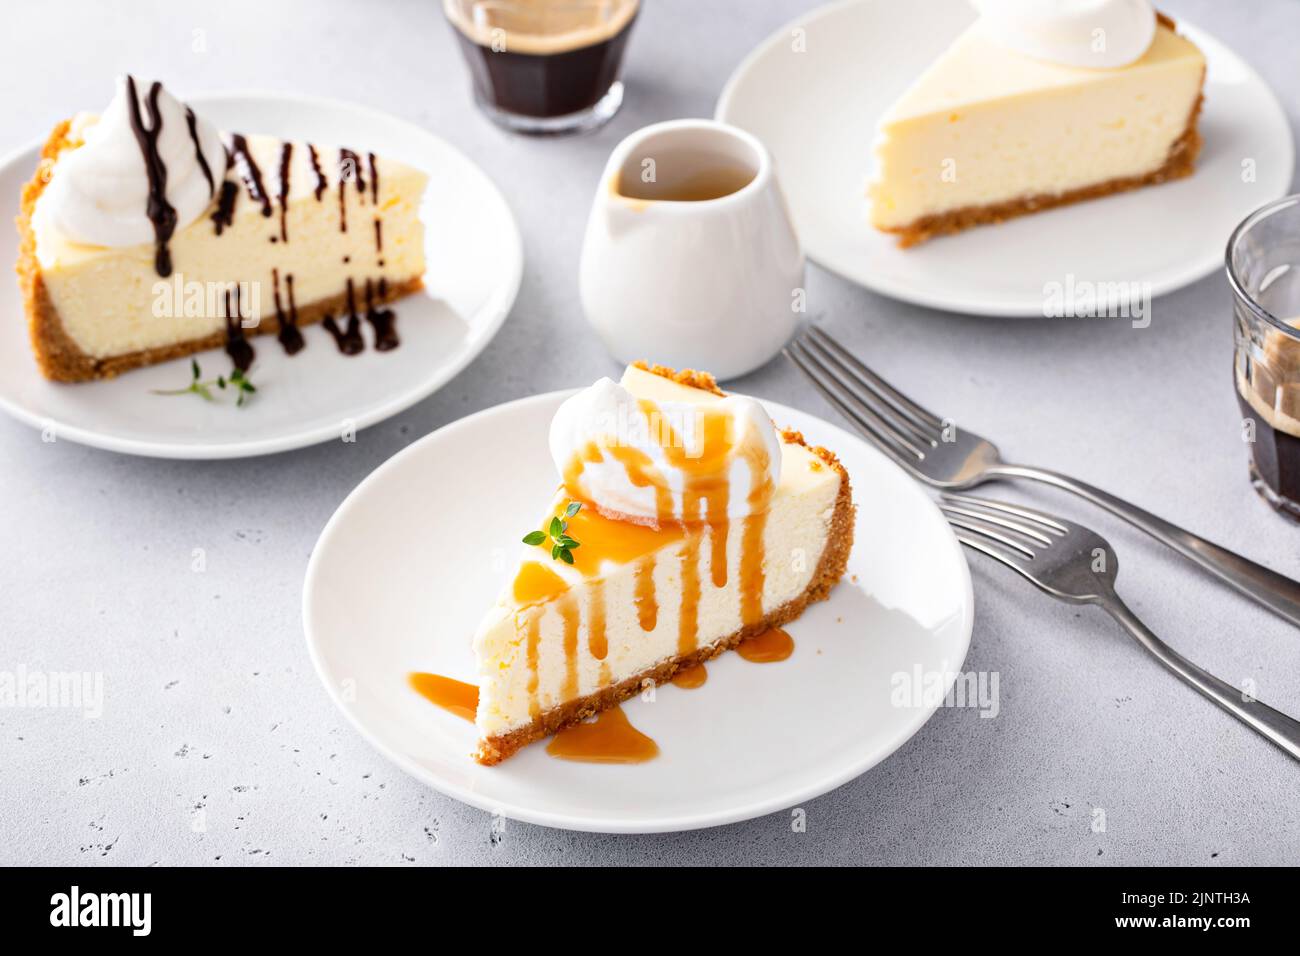 Classic New York cheesecake with a dollop of whipped cream Stock Photo